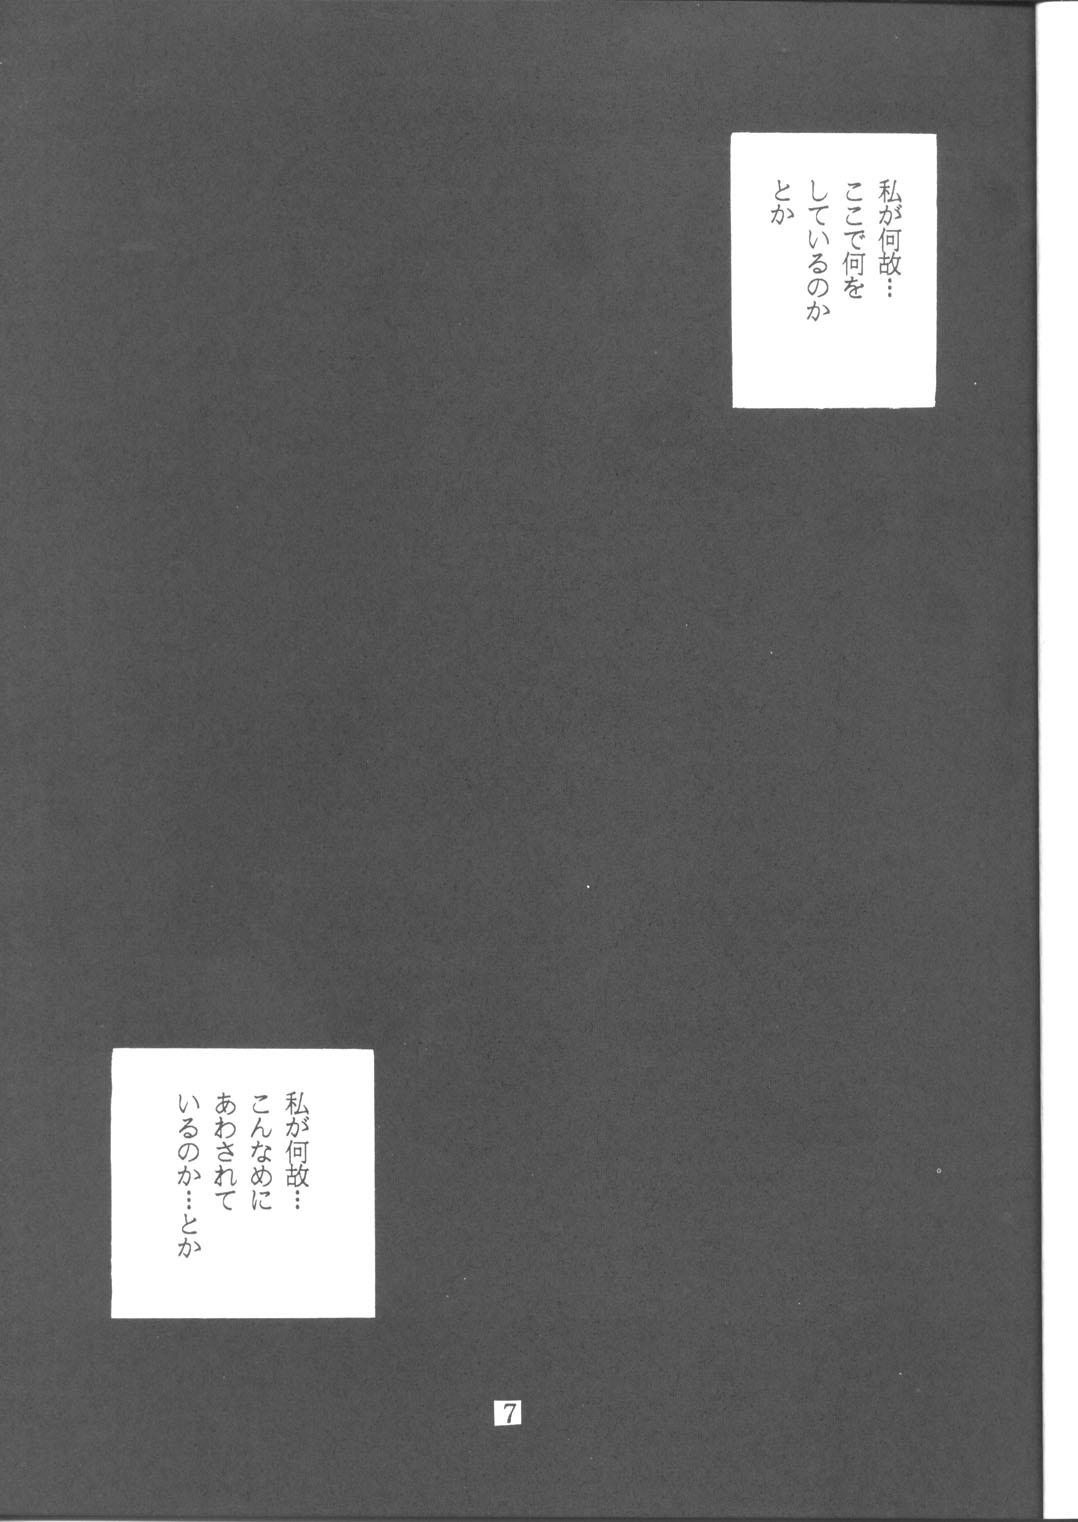 Ameture Porn Queen Ninja 2 - King of fighters Tattoos - Page 6